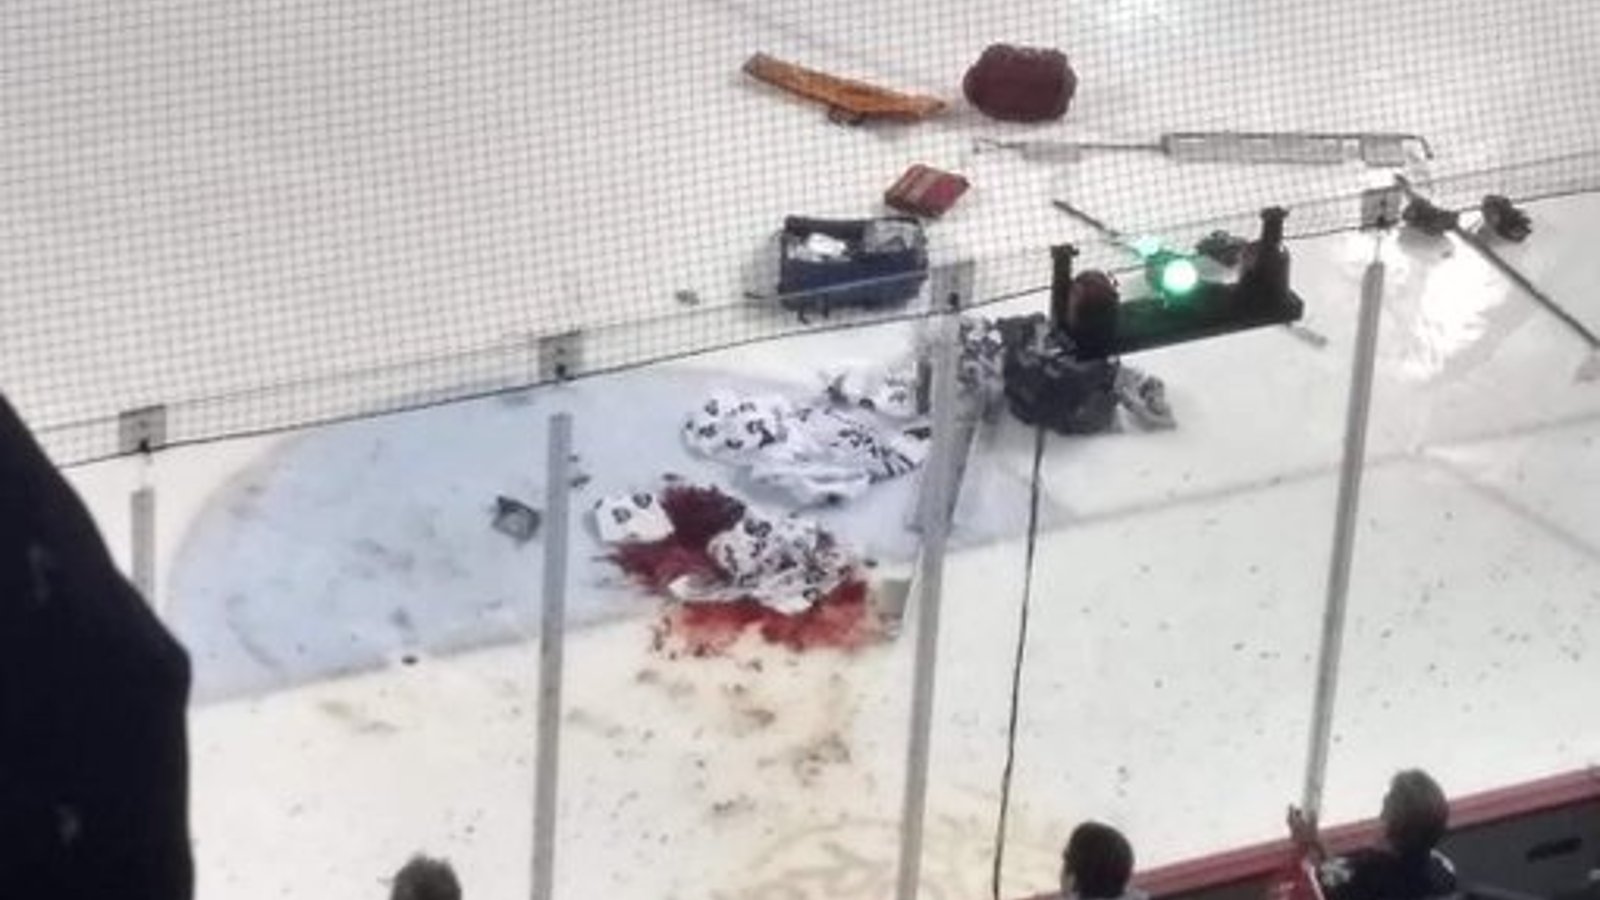 IceDogs goalie Tucker Tynan rushed to hospital after getting cut by a skate! 